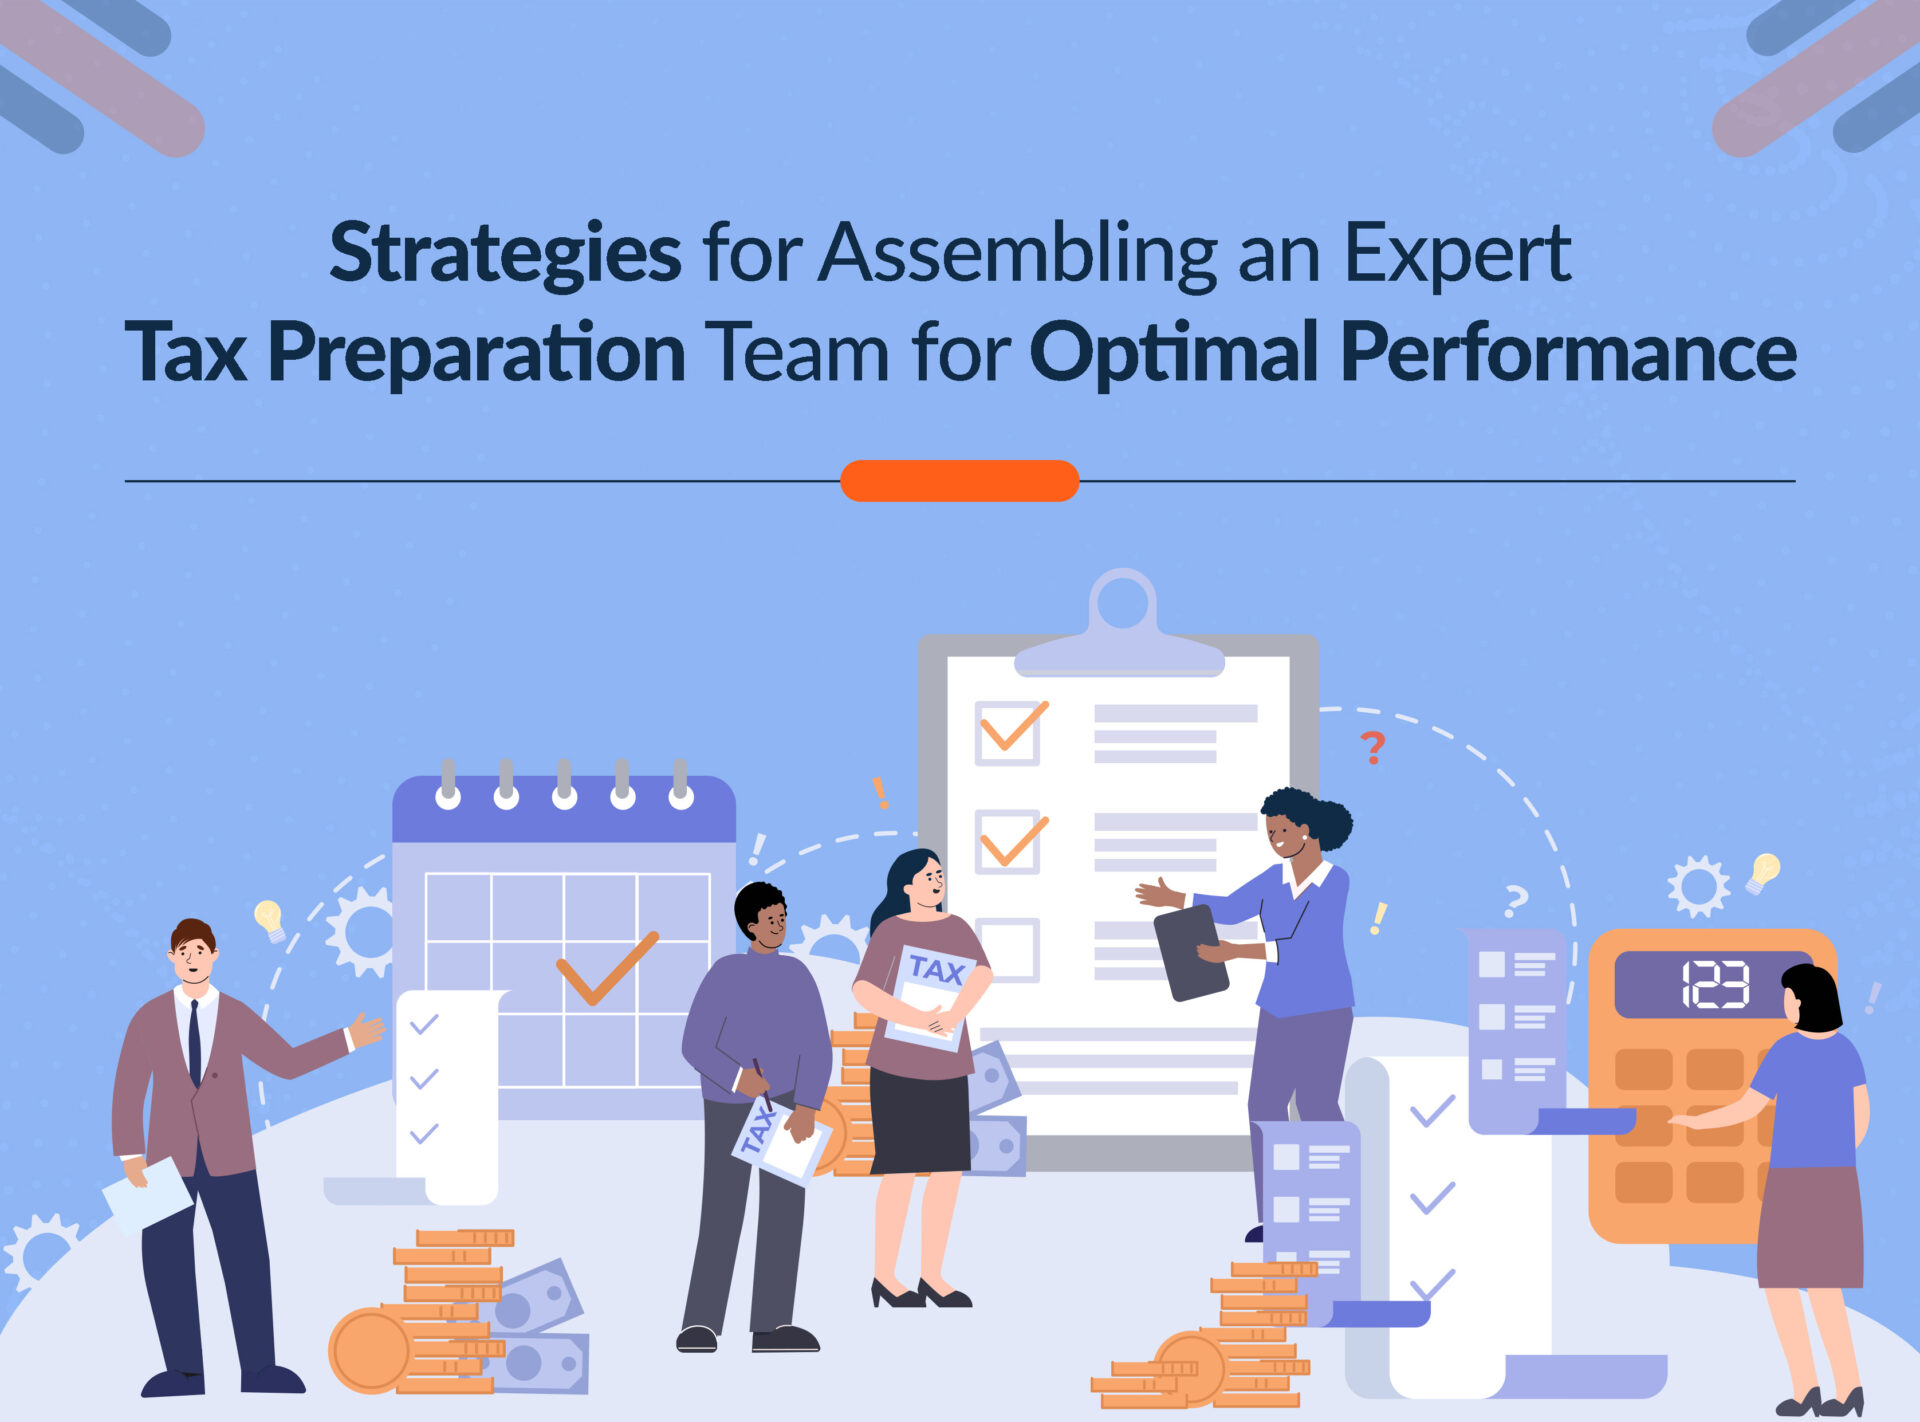 7 Strategies for Assembling an Expert Tax Preparation Team for Optimal Performance